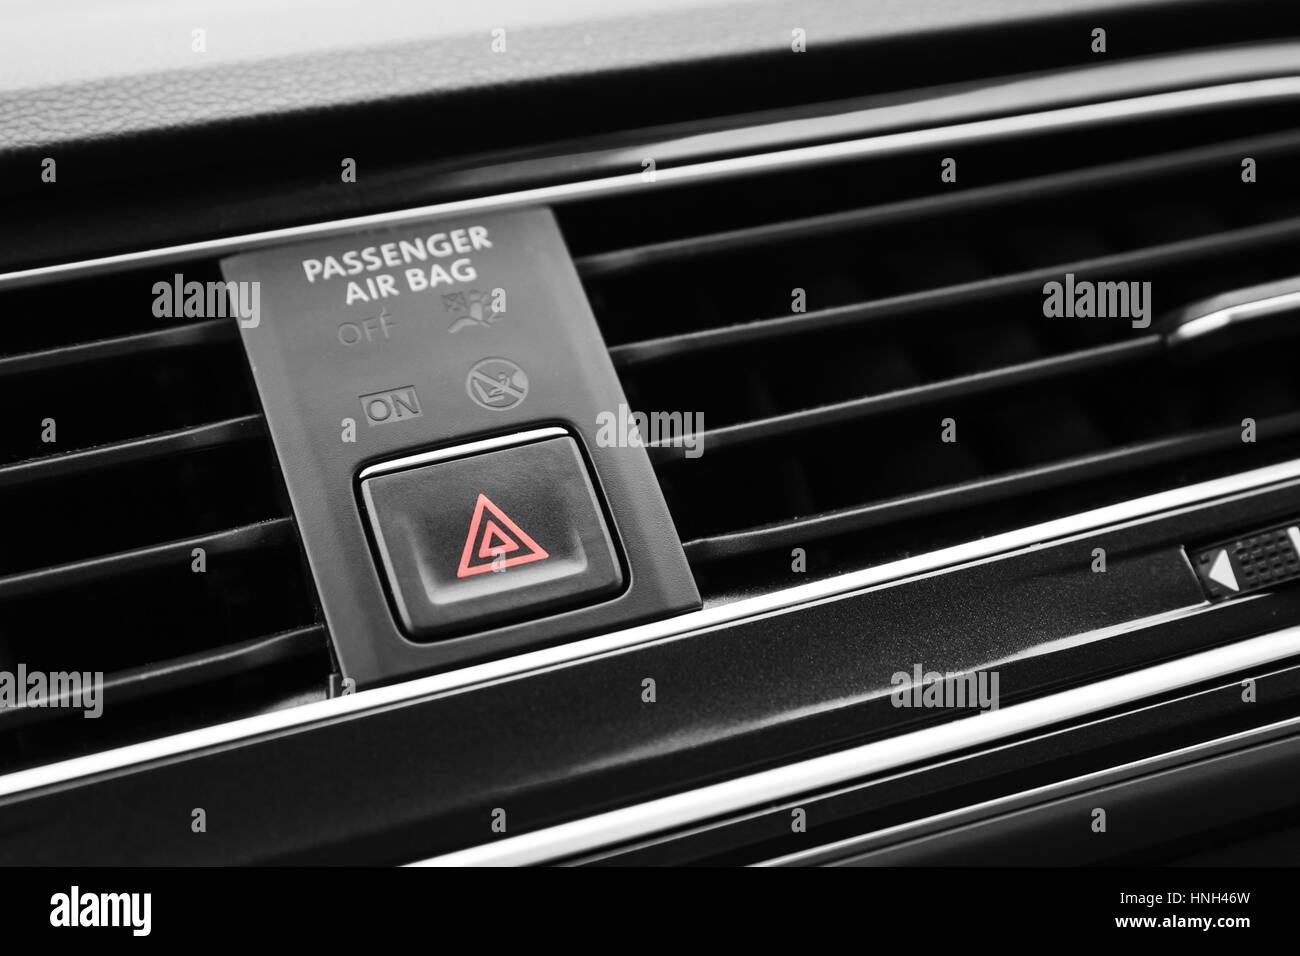 Emergency stop button with red tiangle sign, modern black car interior details Stock Photo